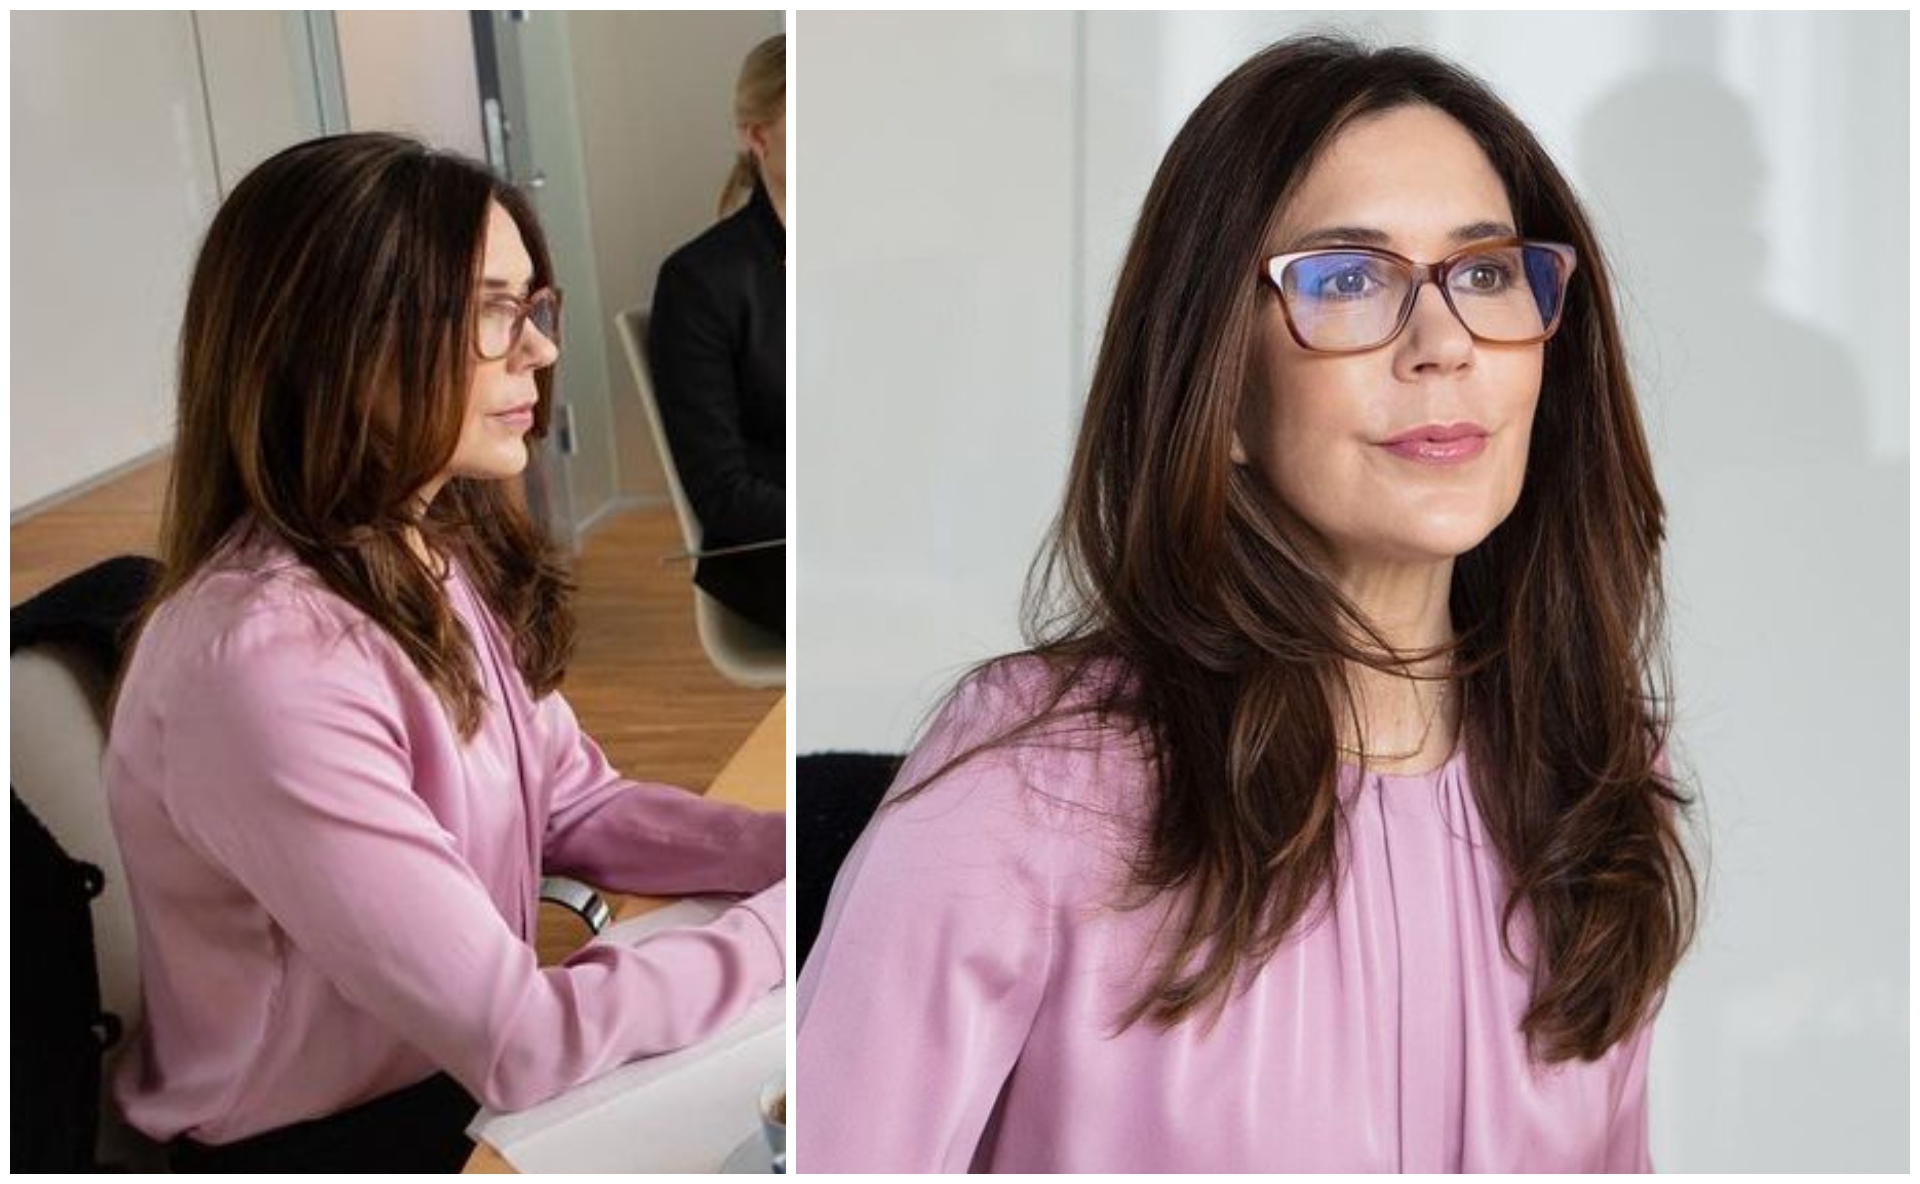 Crown Princess Mary makes a dazzling bright pink appearance amidst lockdown in Denmark